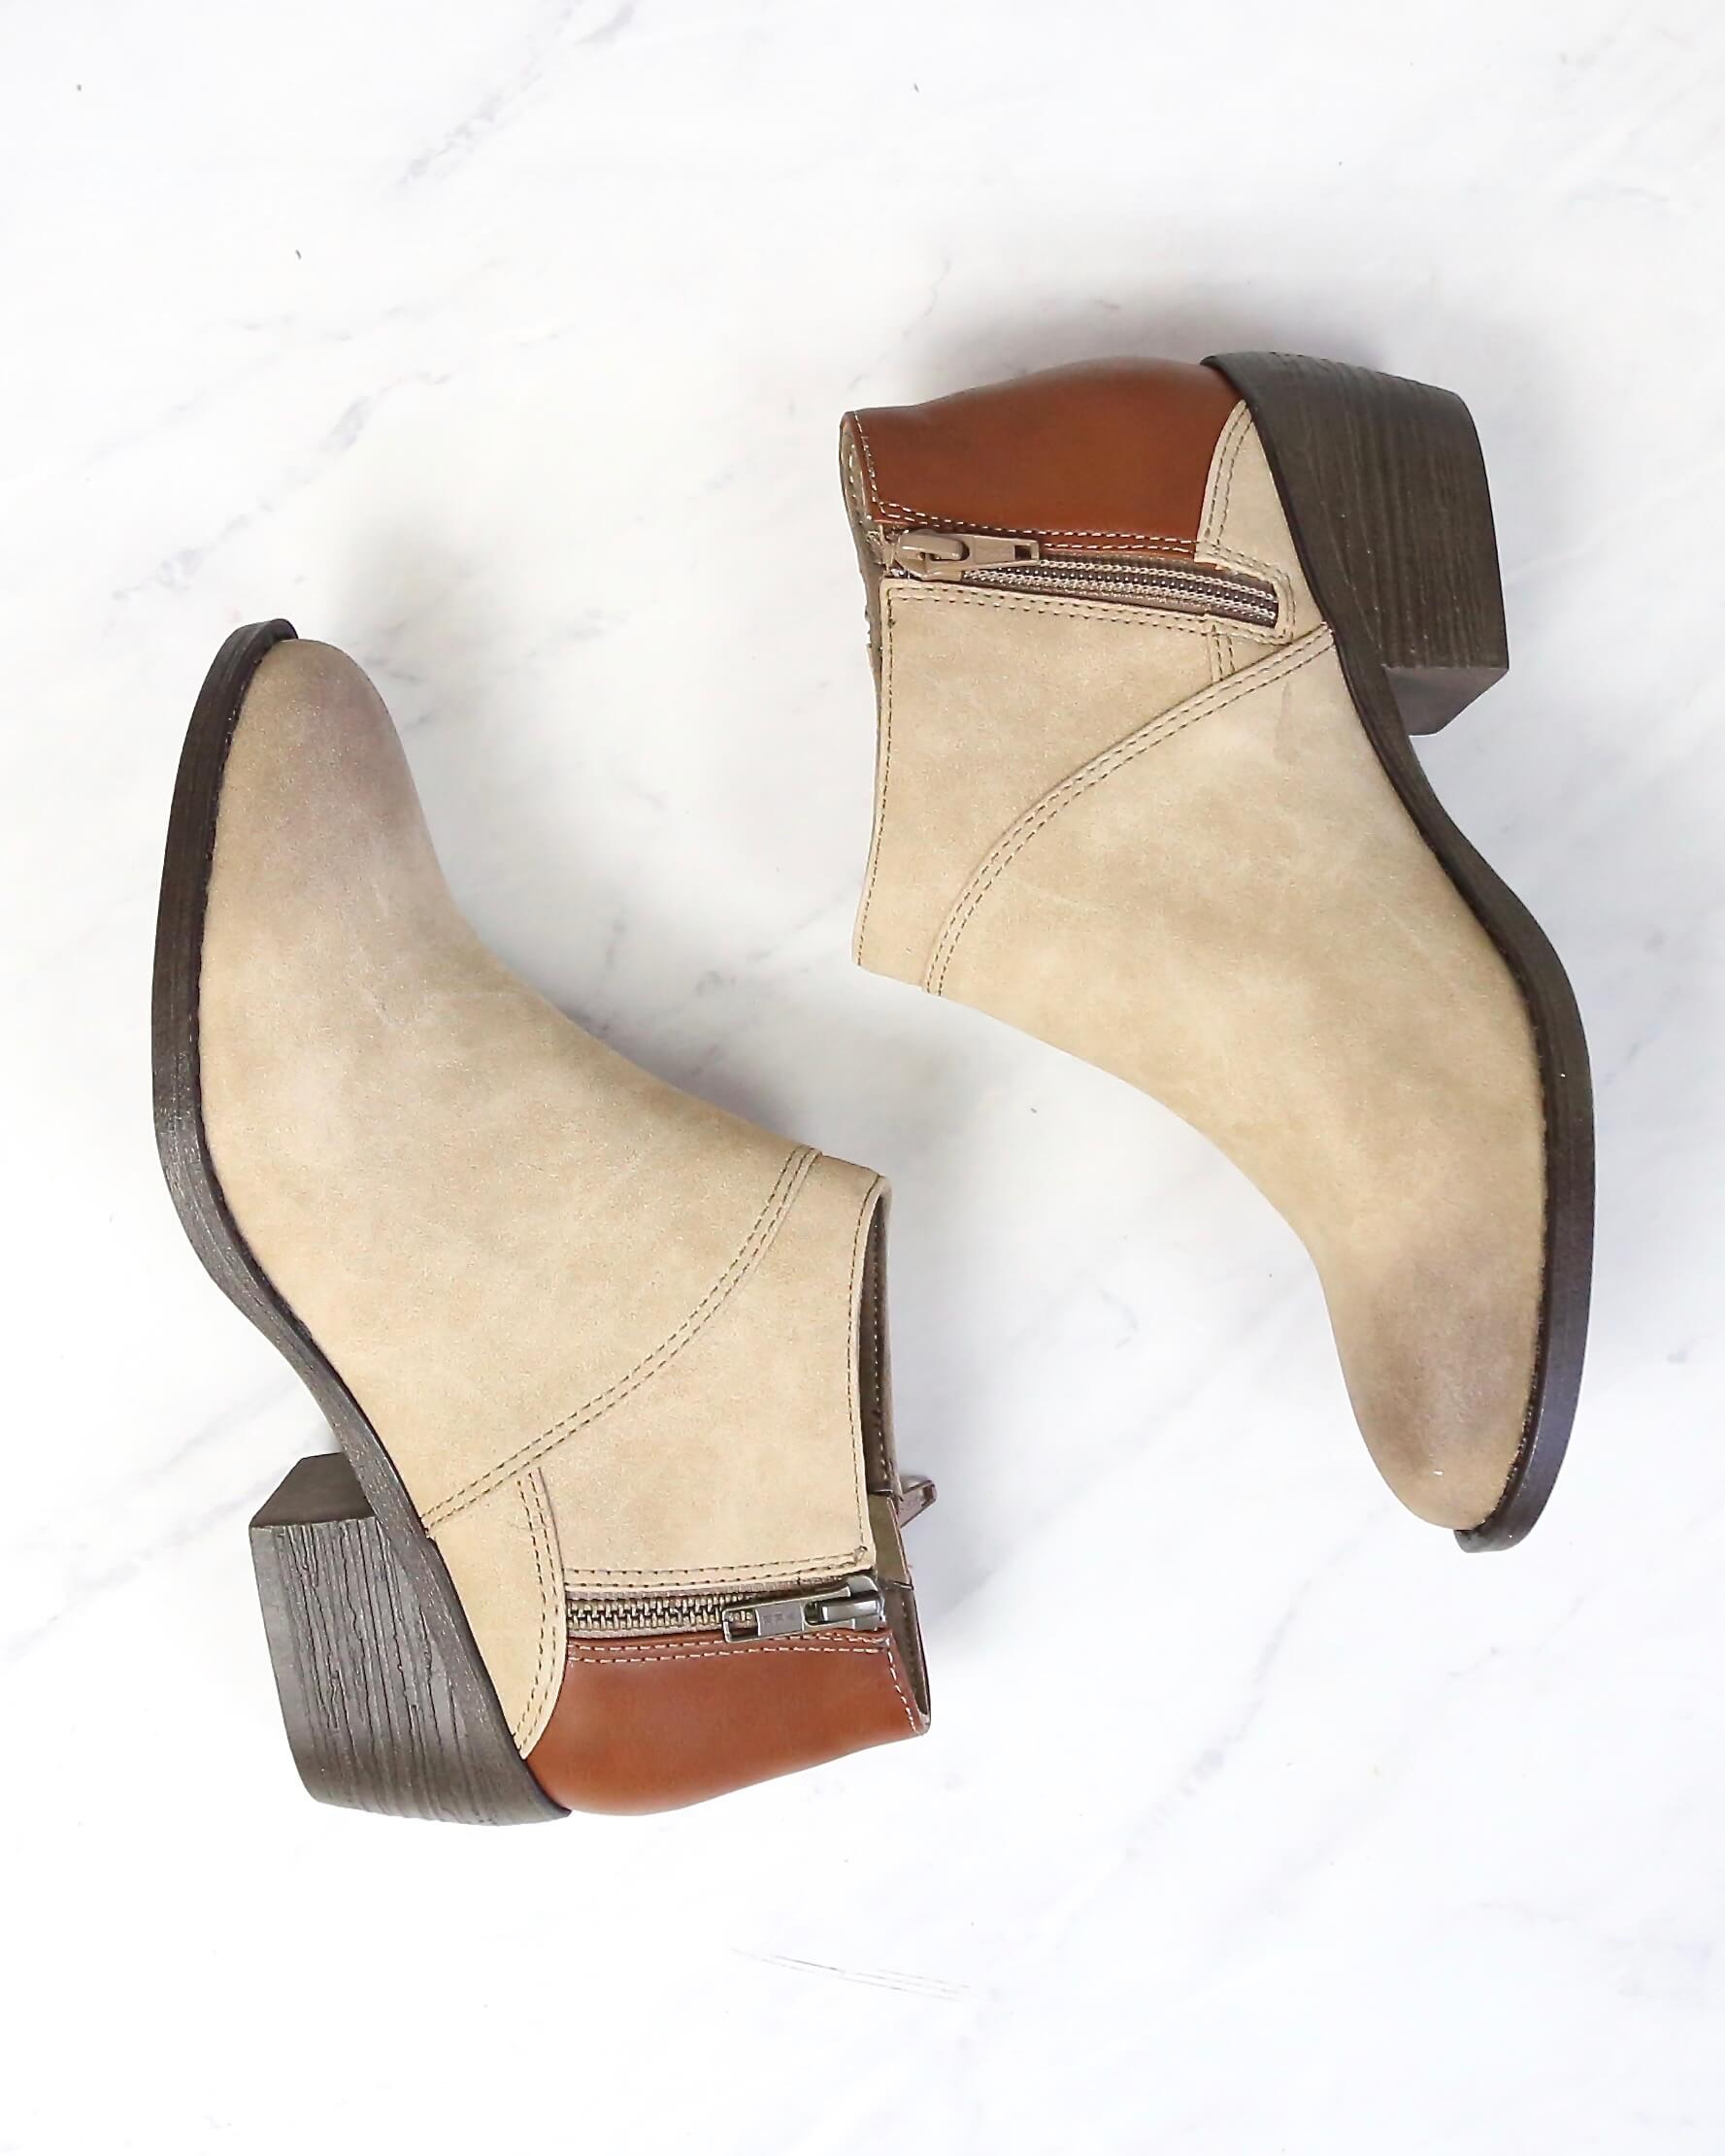 bc footwear union contrast material booties